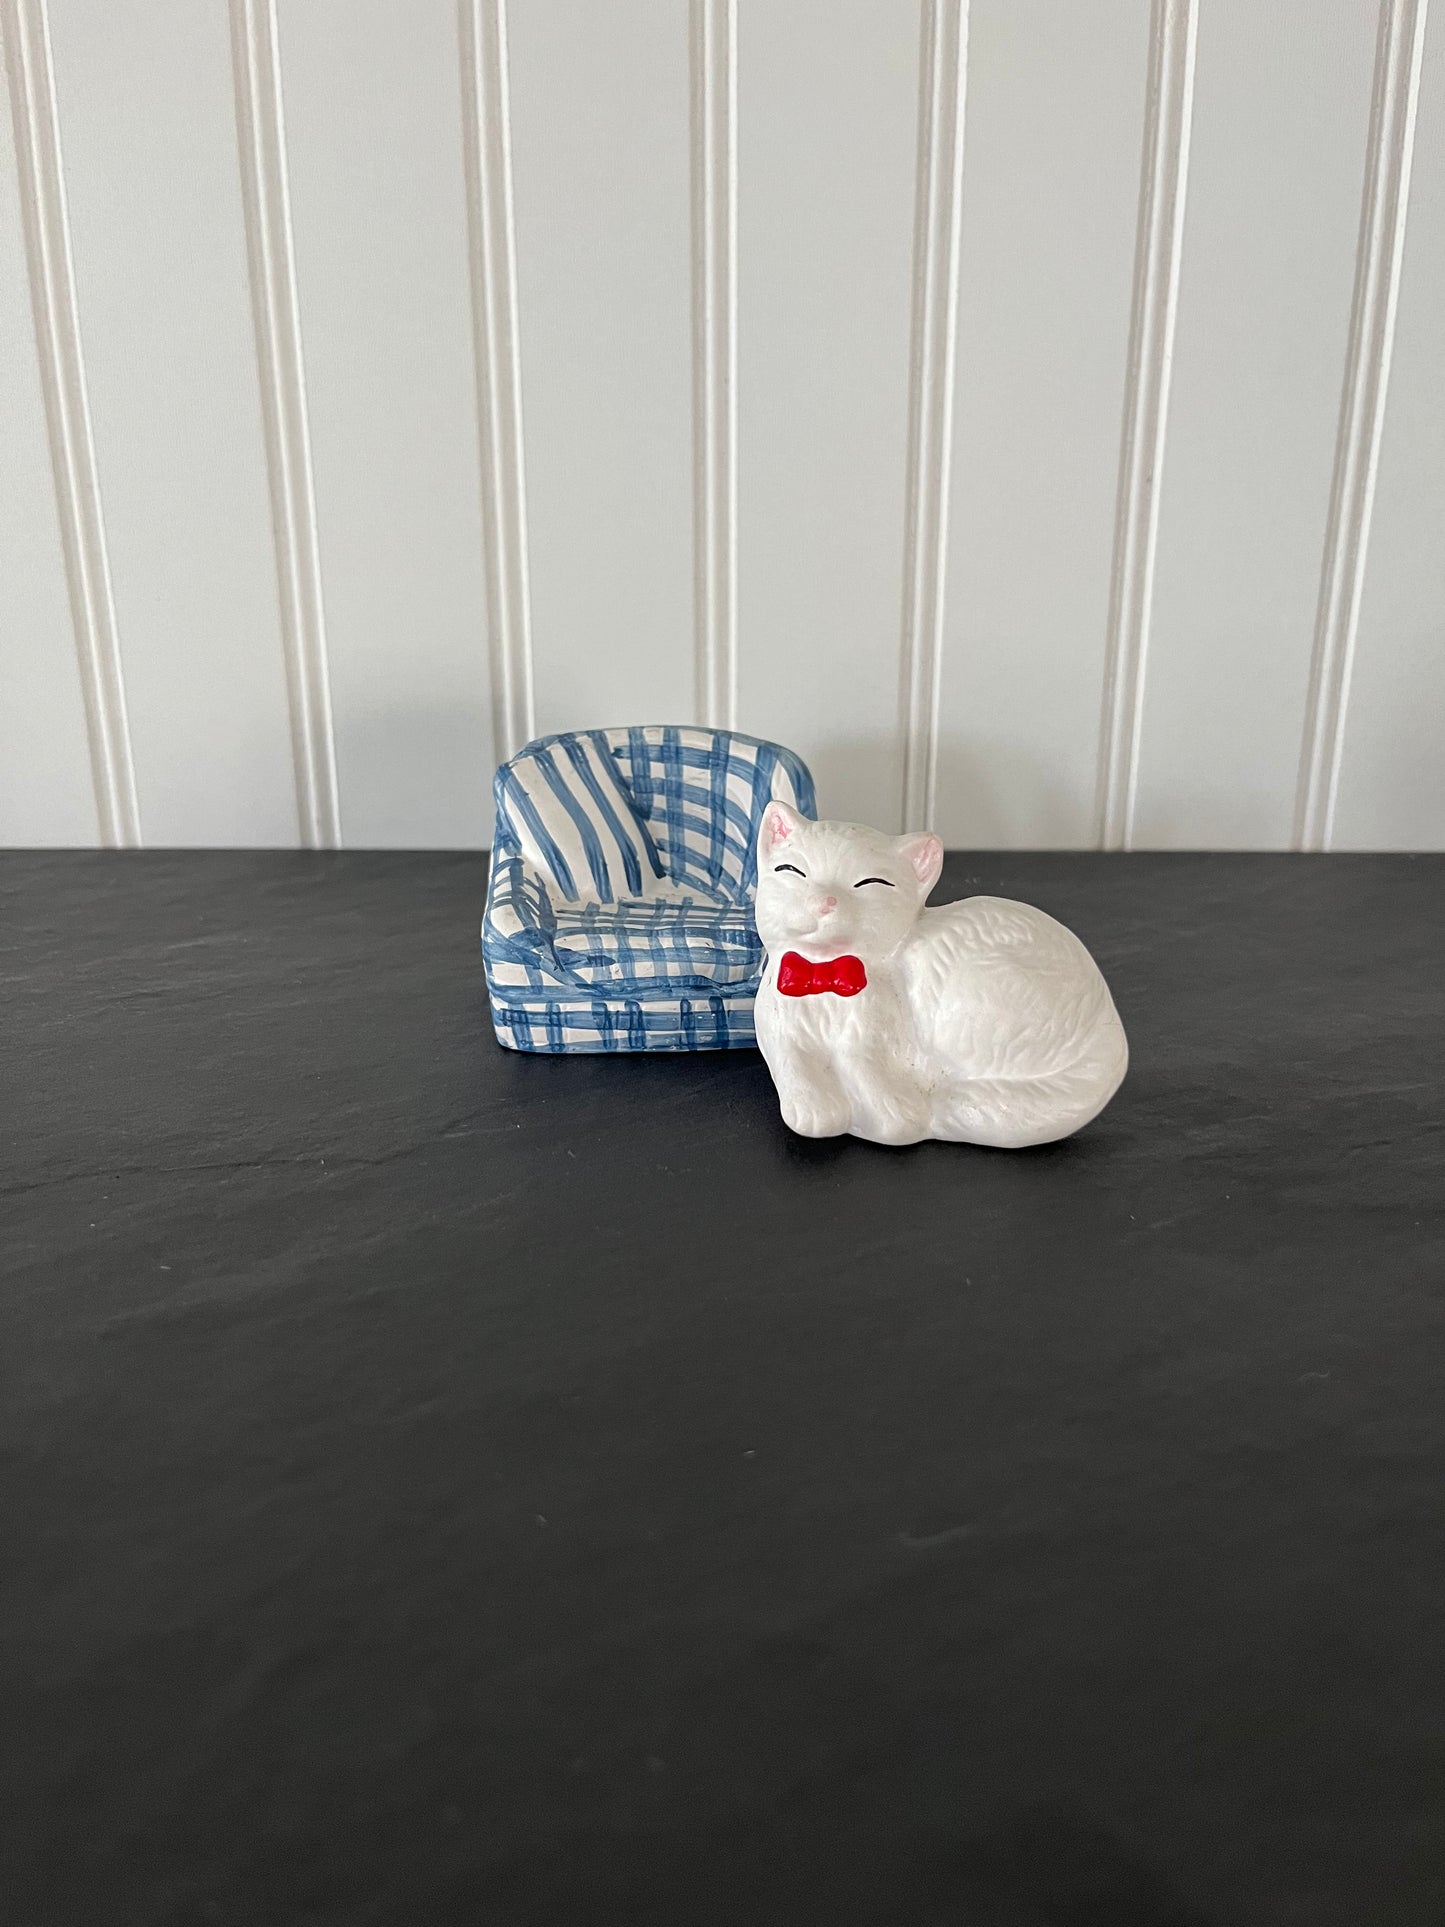 Vintage White Cat on Blue Gingham Chair Salt and Pepper Shakers - Charming Collectibles